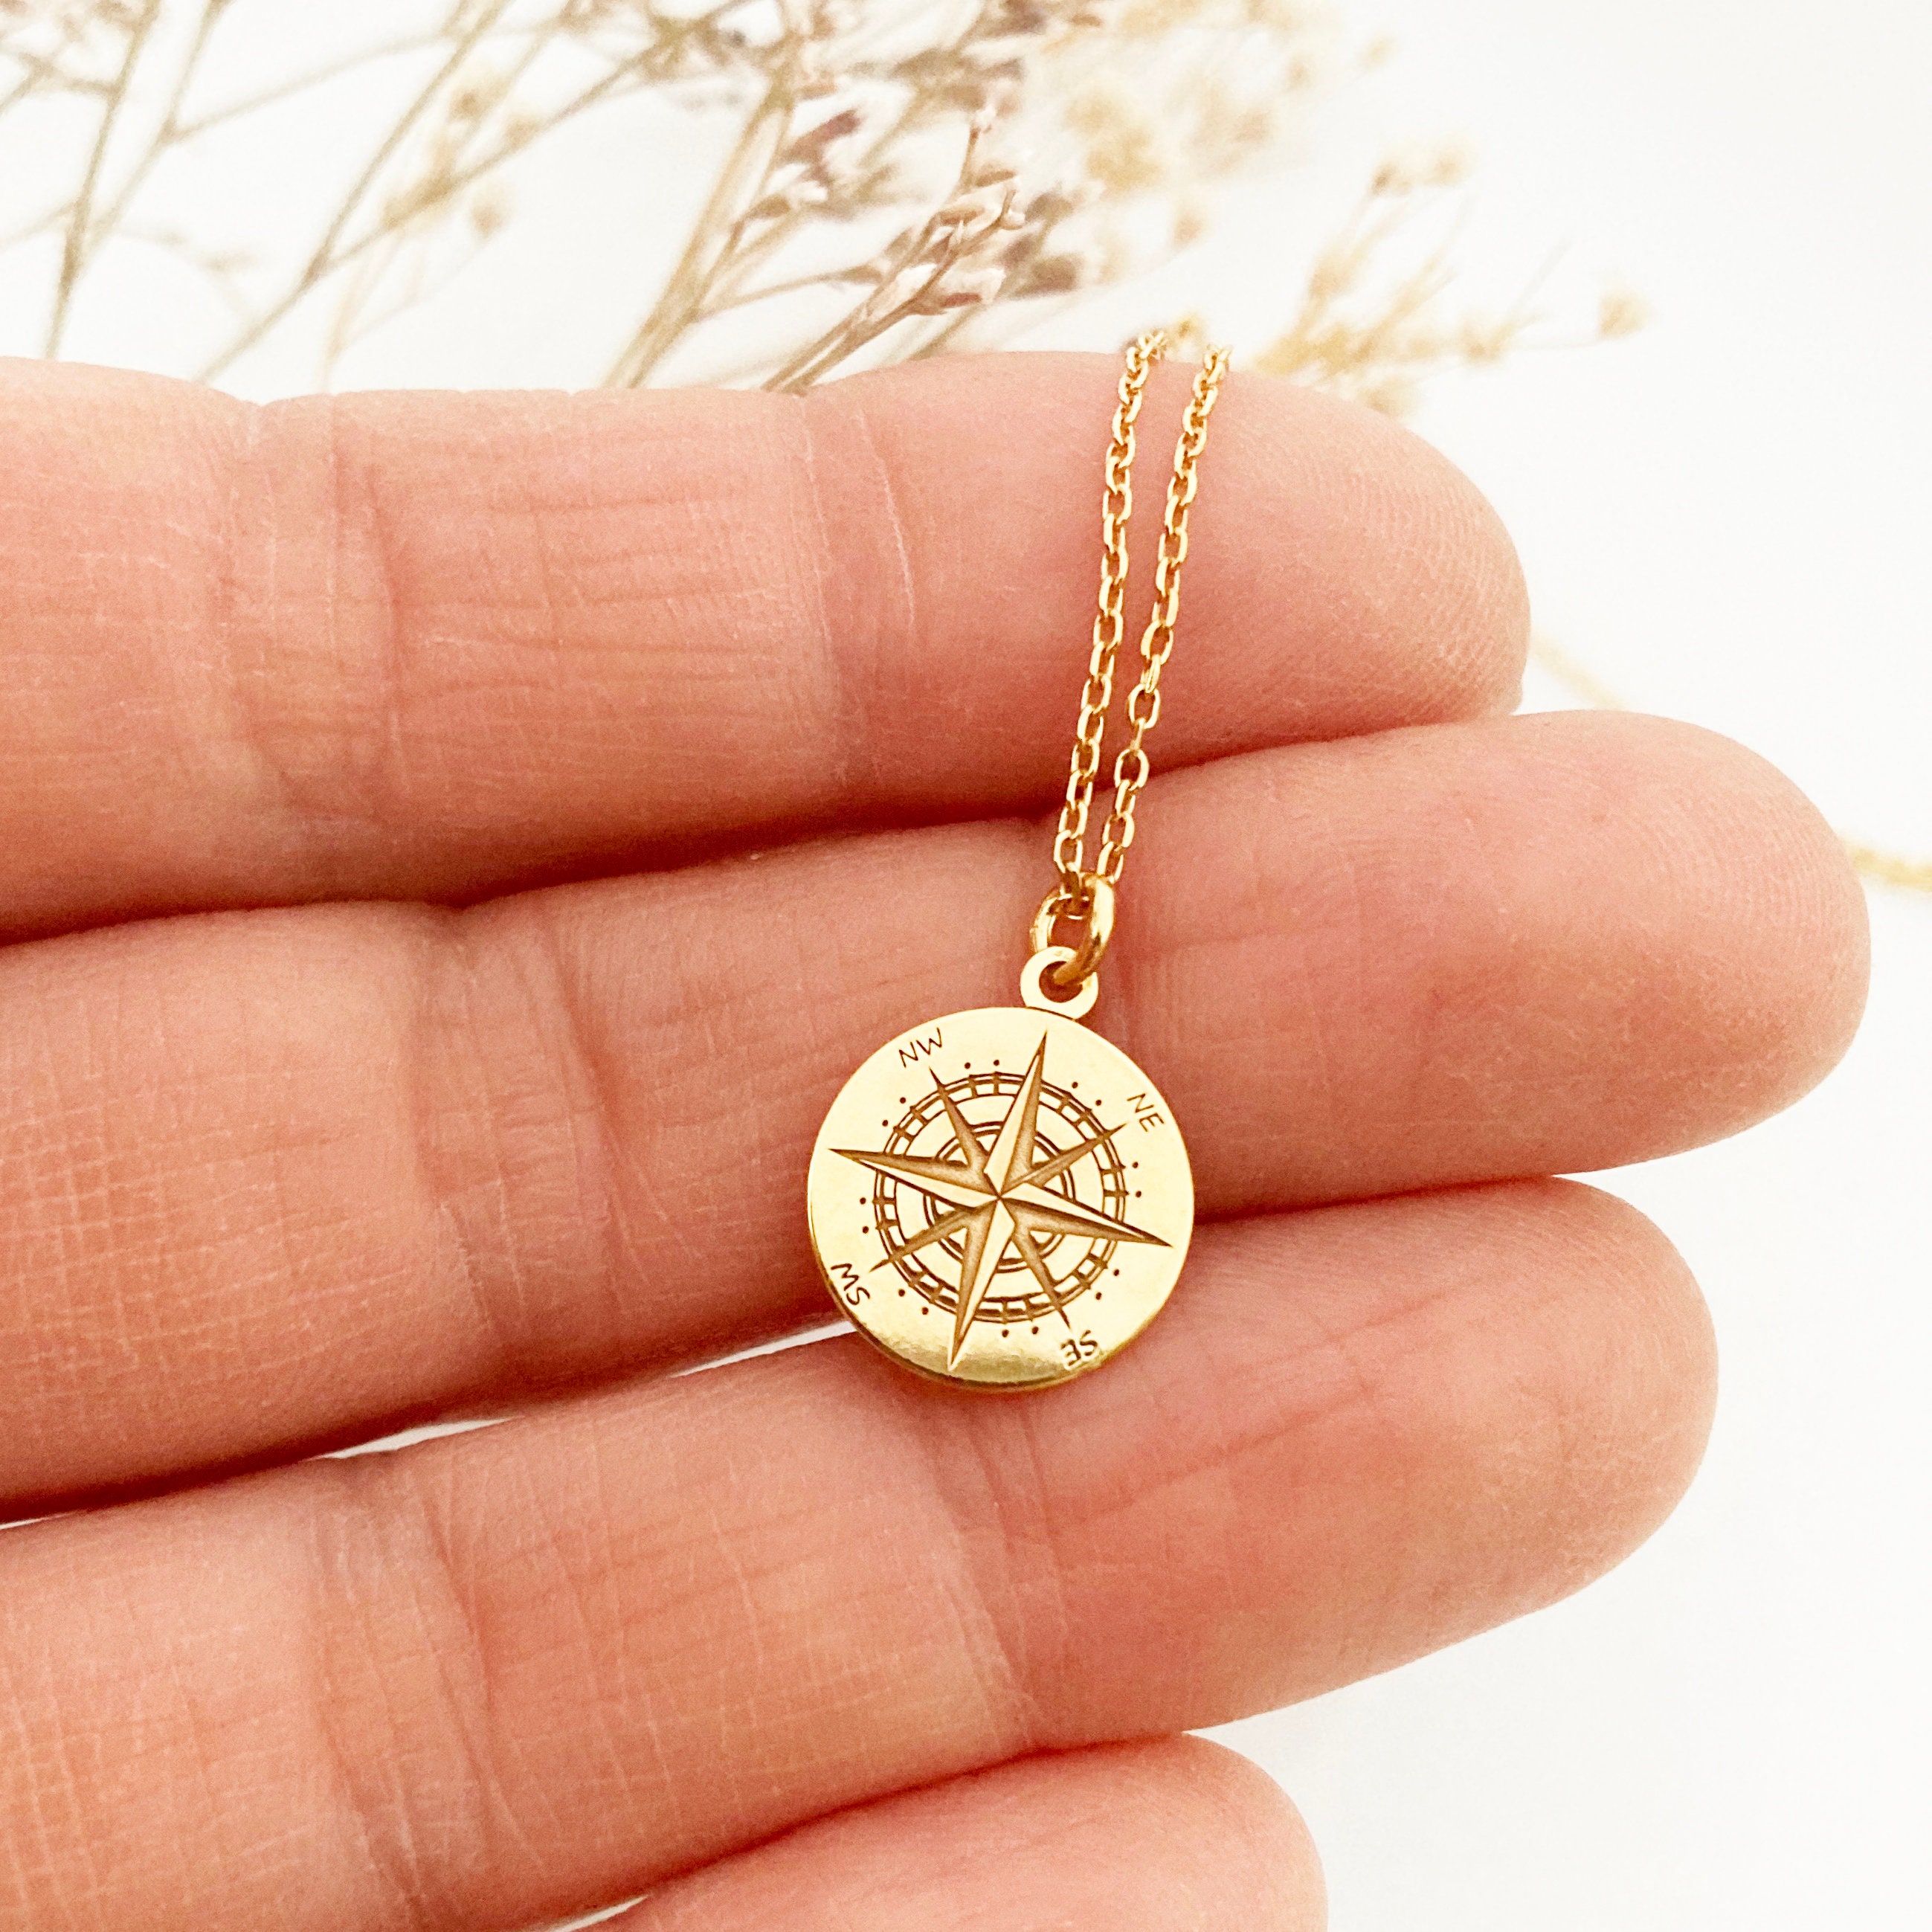 SALE Best Friend GiftRose gold Compass by DianaDpersonalized